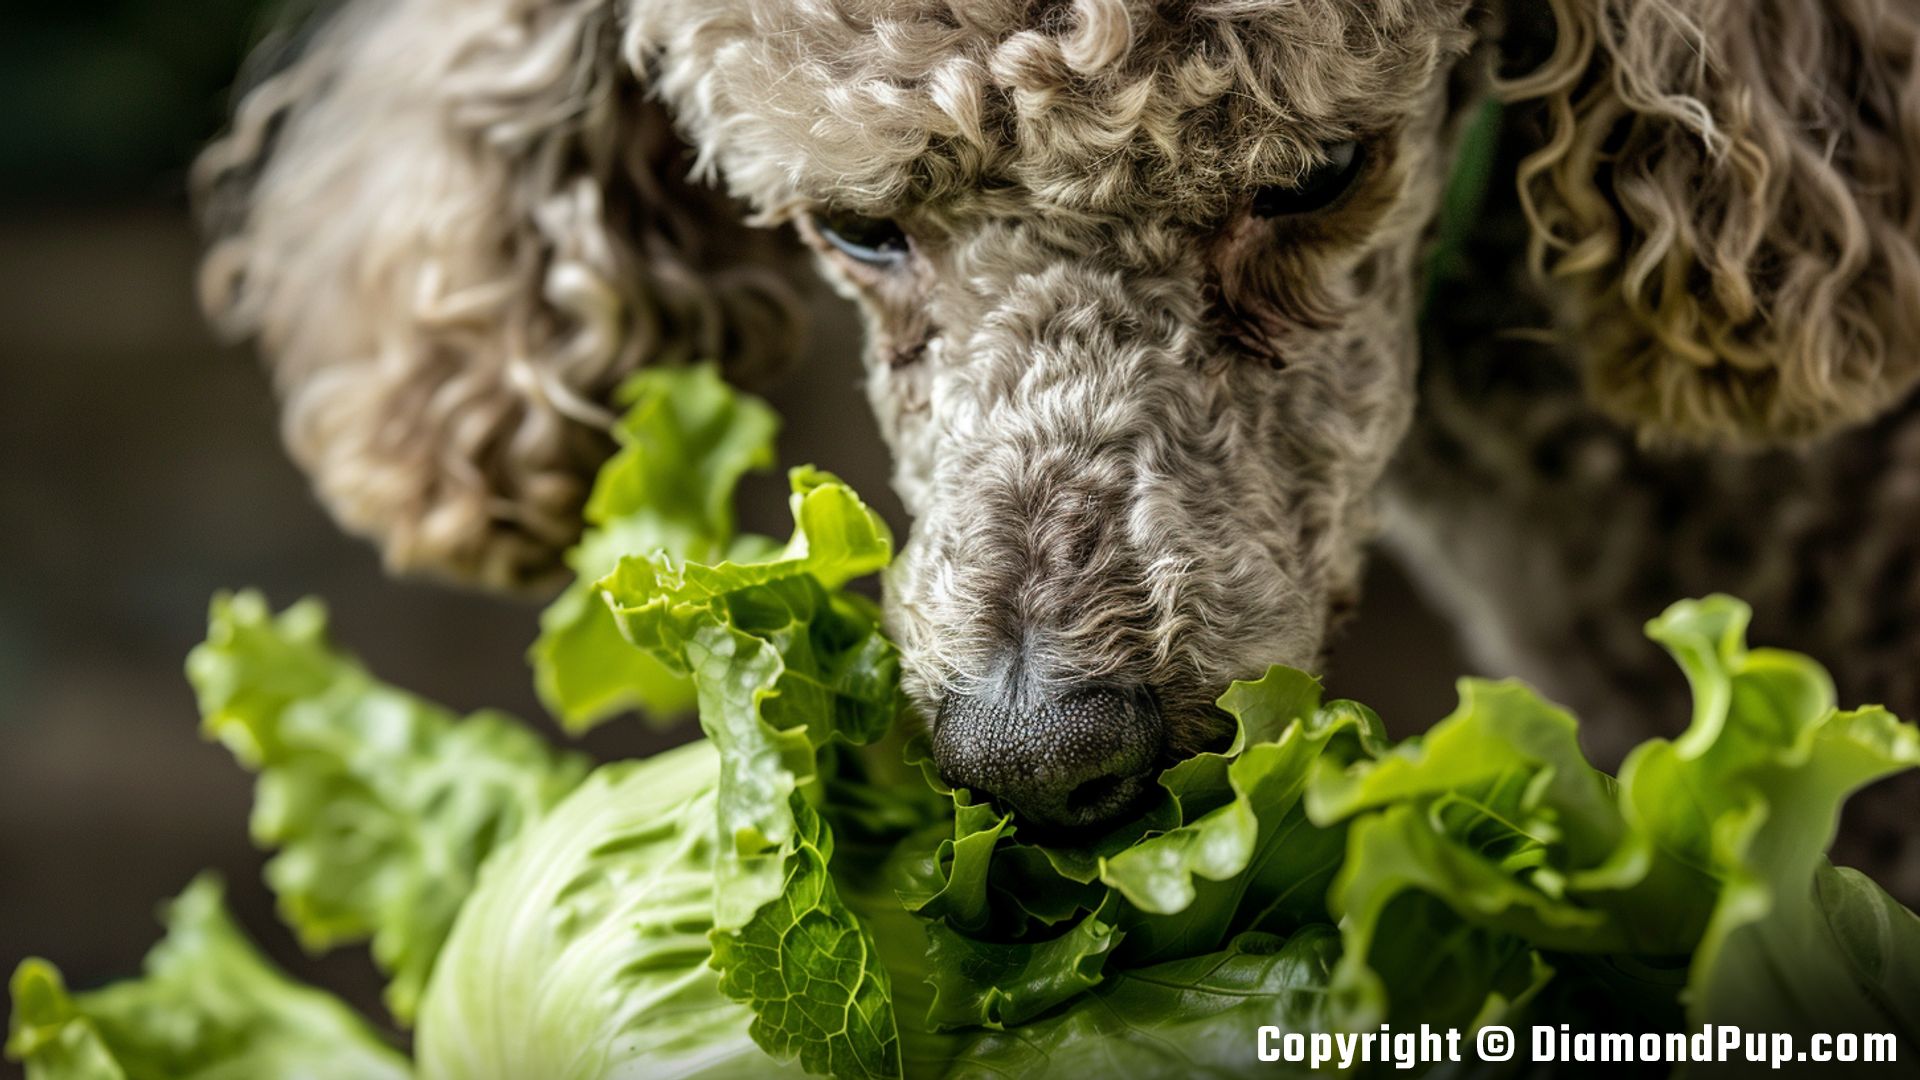 Photo of a Cute Poodle Snacking on Lettuce